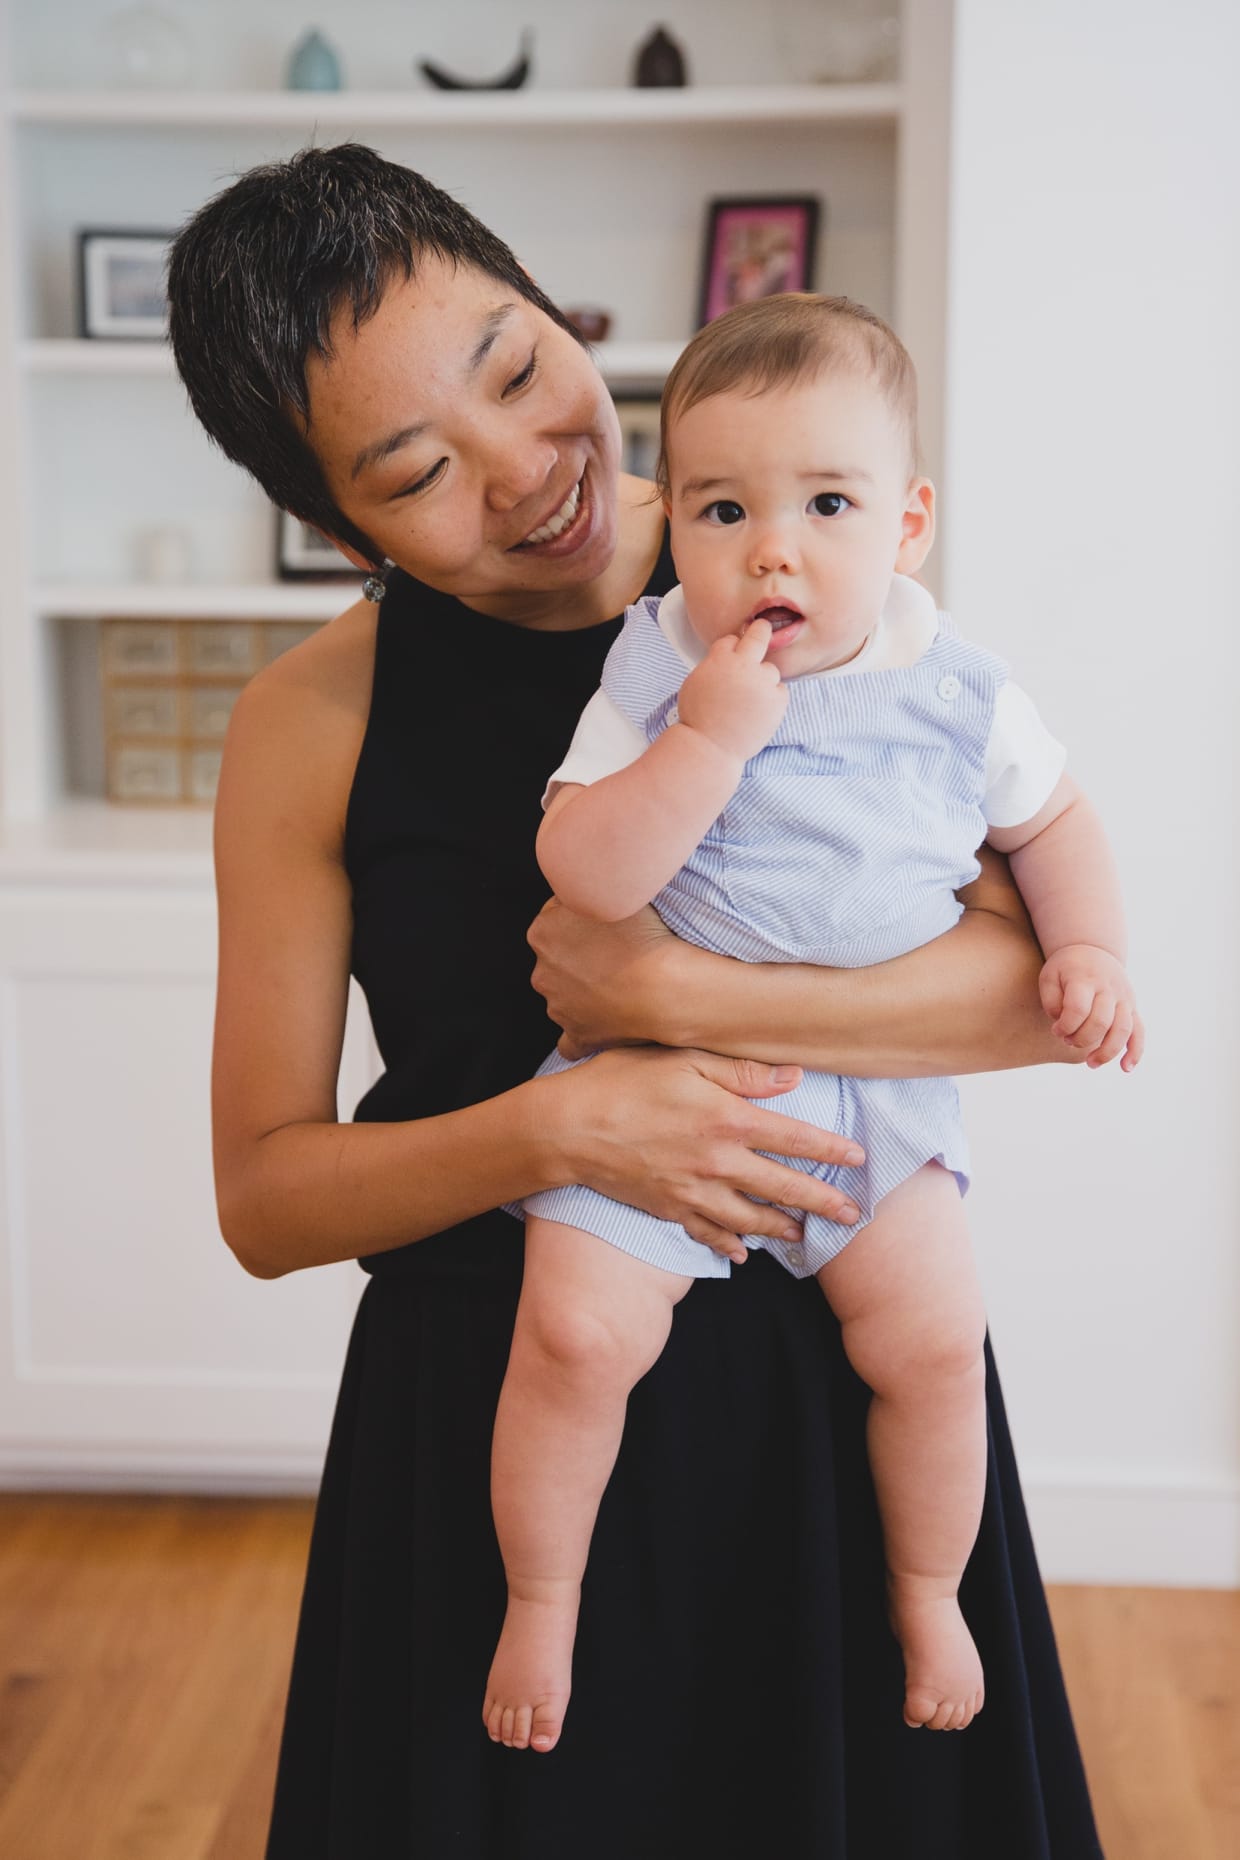 A sweet portrait of a mother holding her baby boy in their Jamaica Plain home during a family photo session